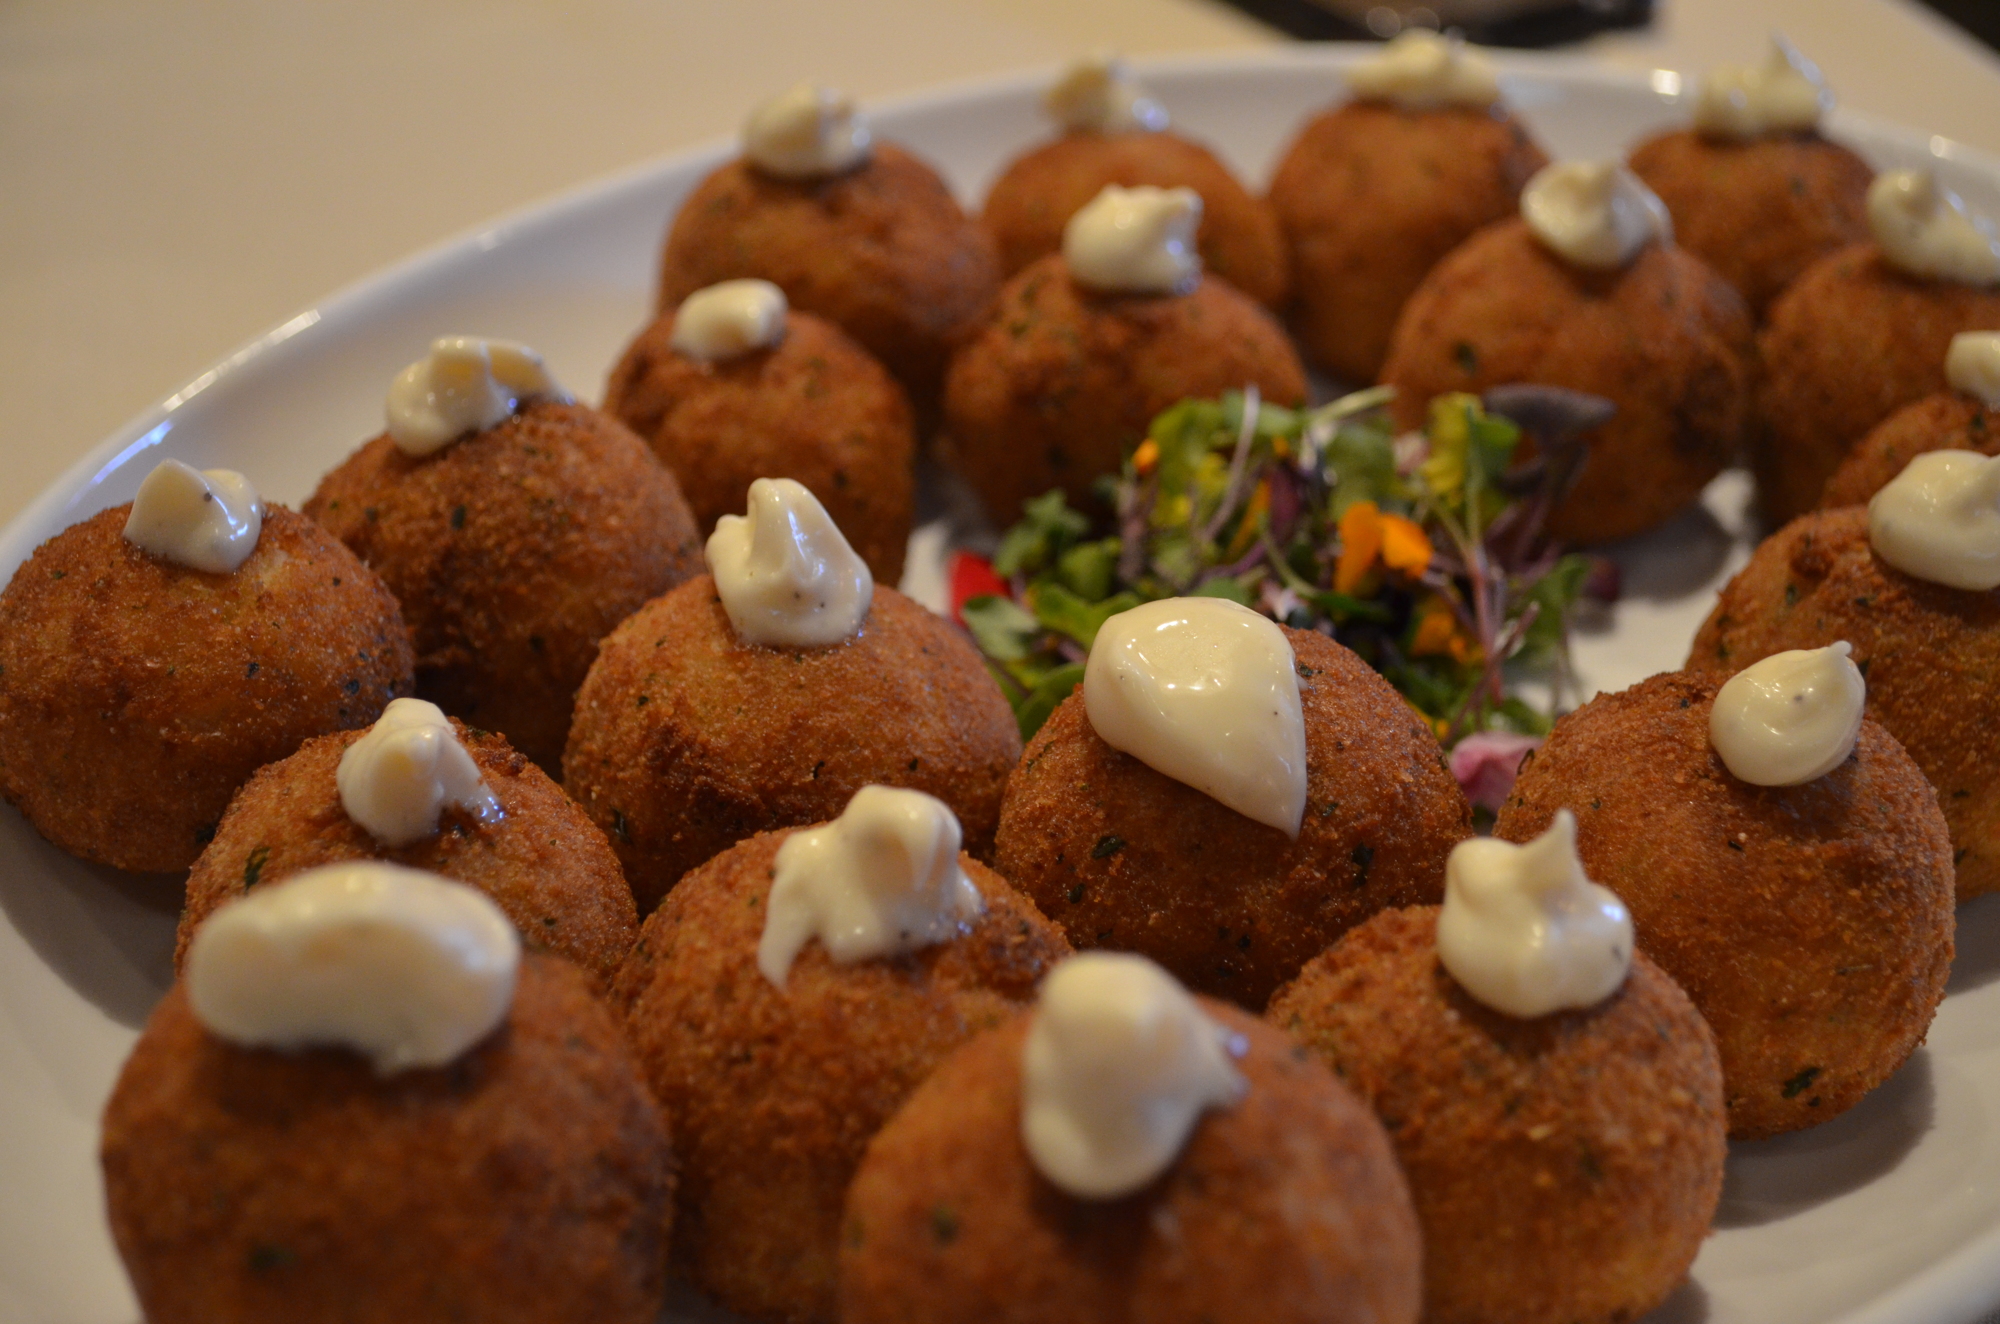 A plate of arancini infused with truffle butter.